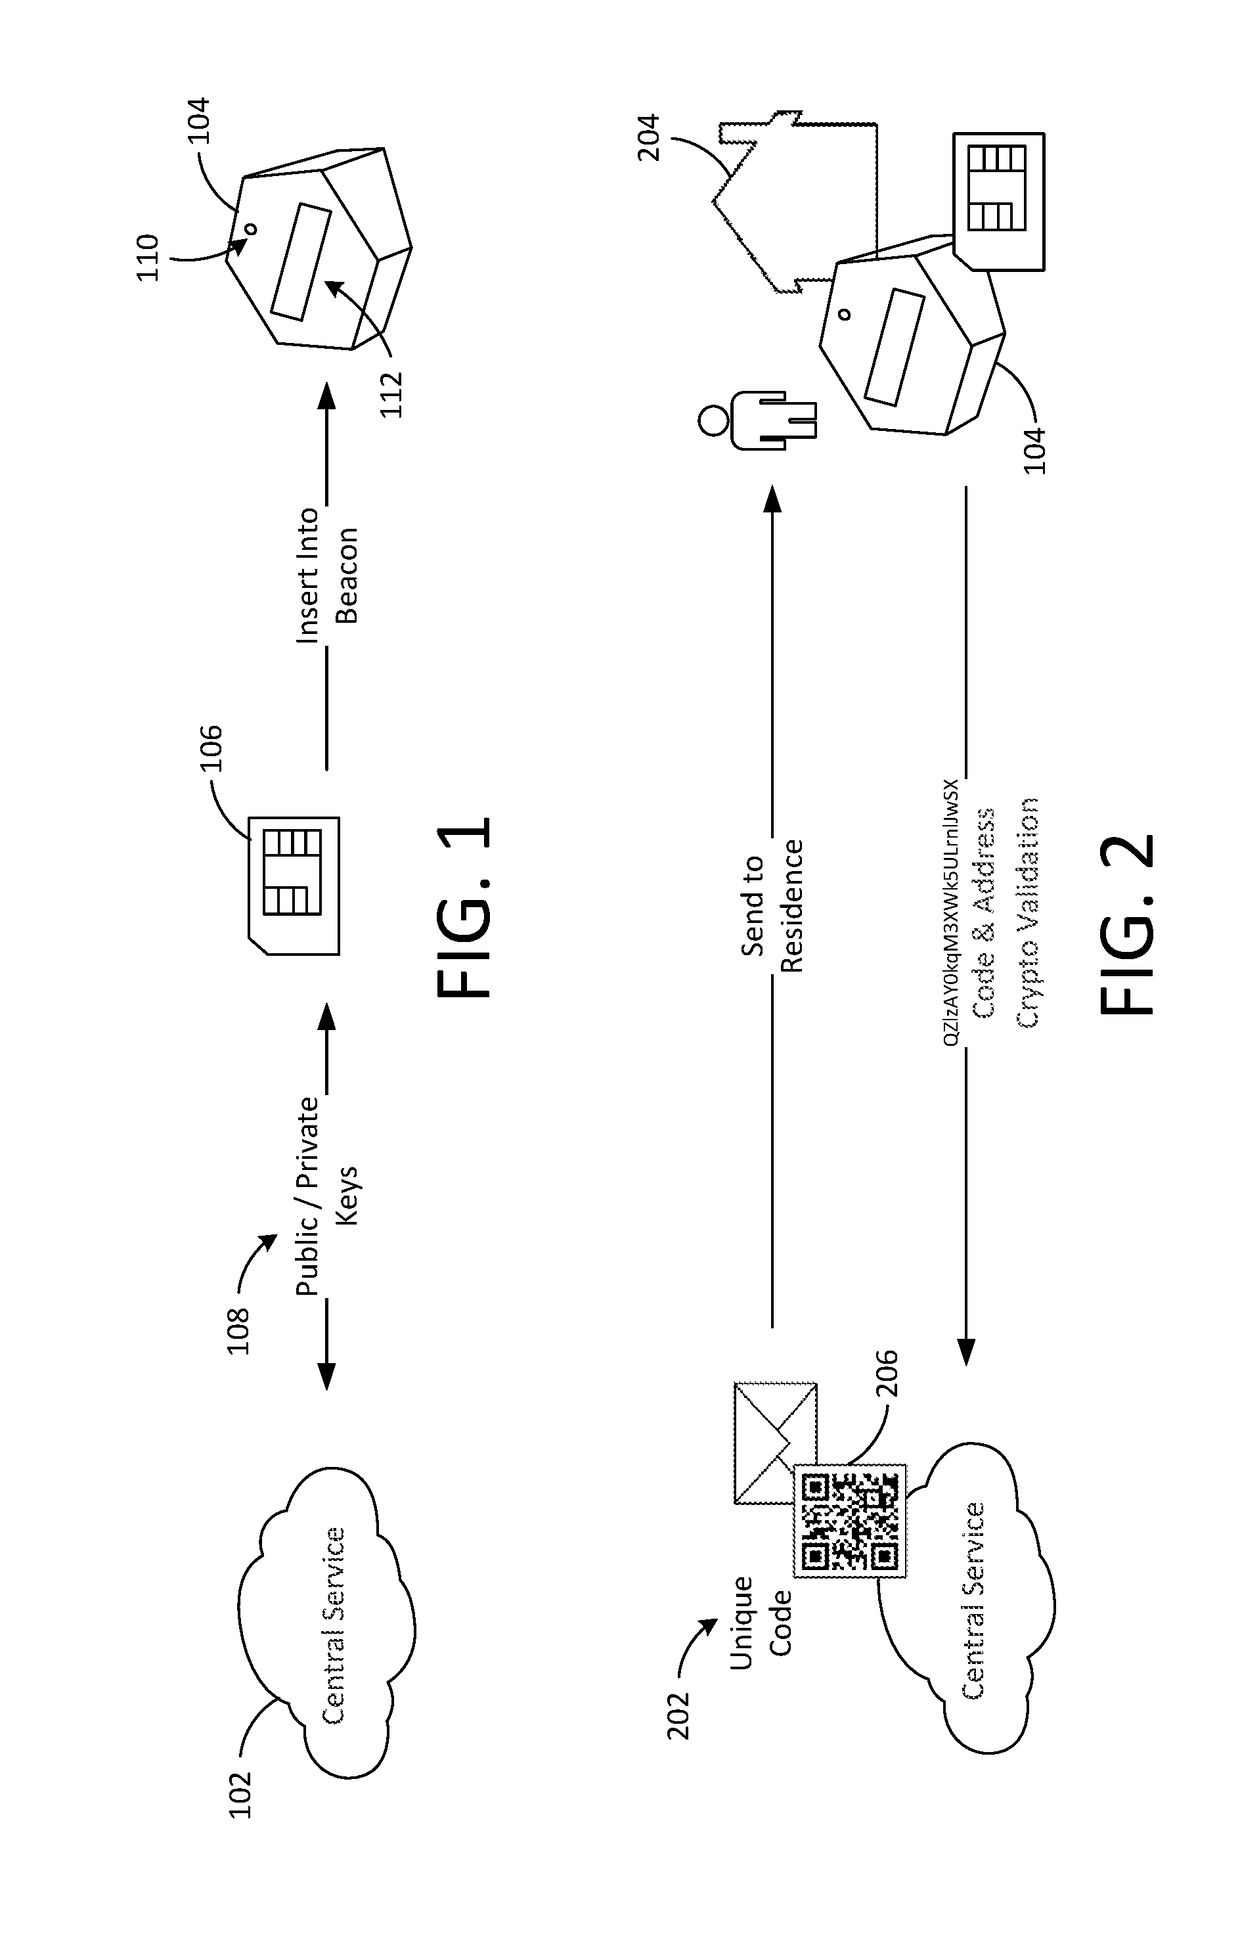 Residence-Based Digital Identity and Strong Authentication System